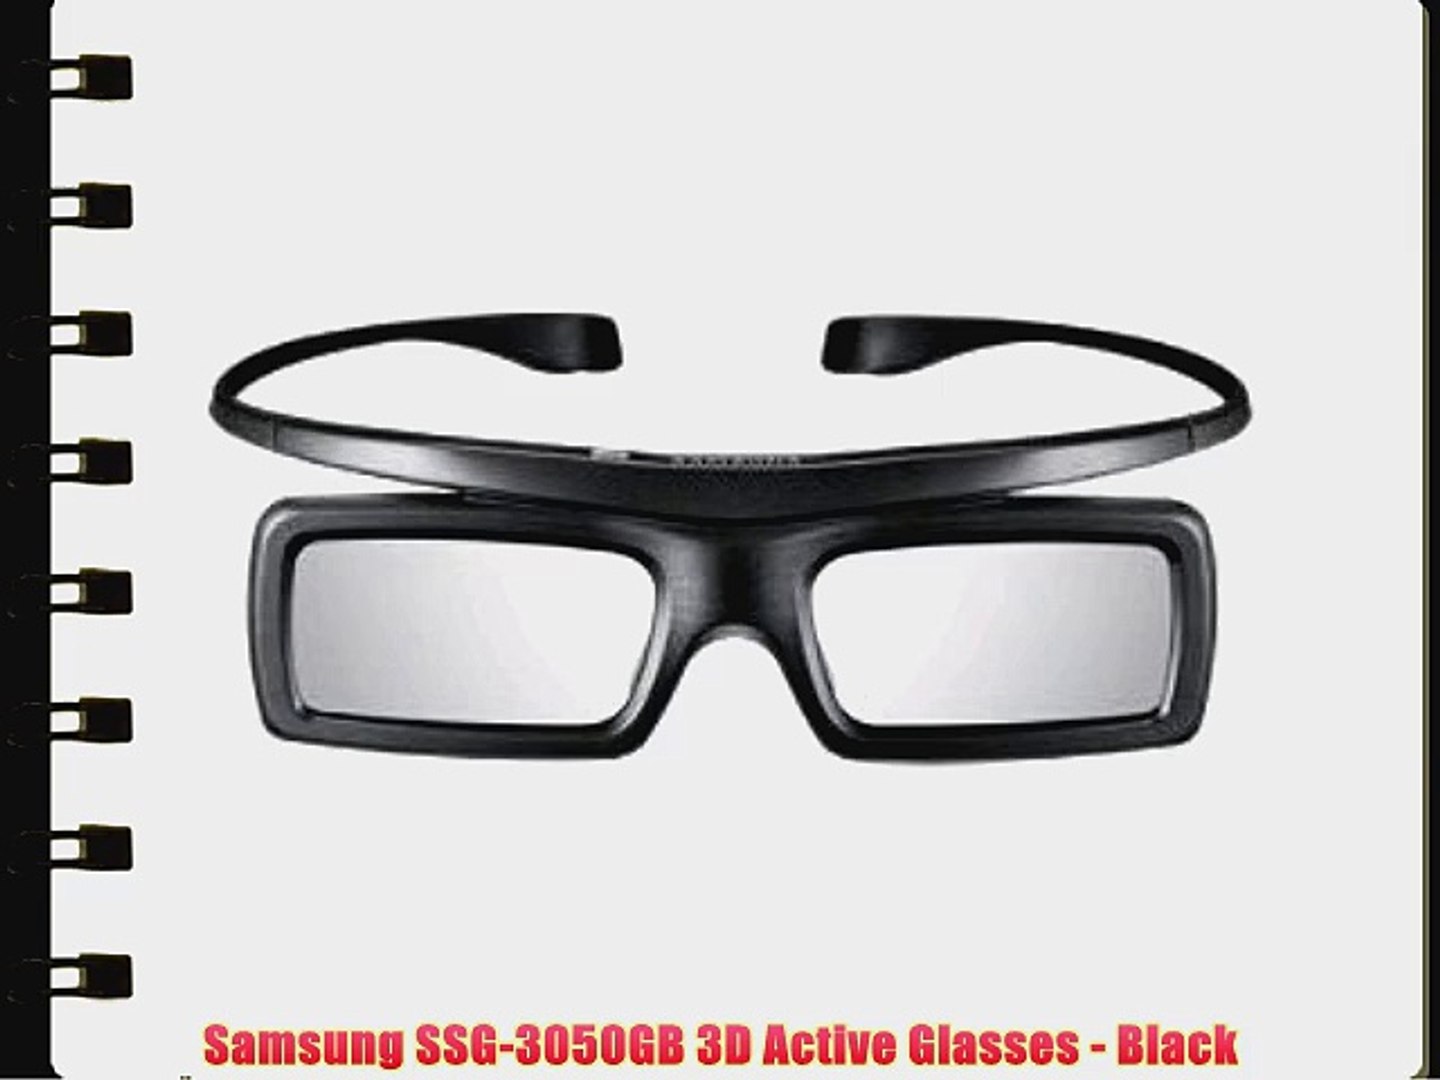 Samsung SSG-3050GB 3D Active Glasses - Black - video Dailymotion